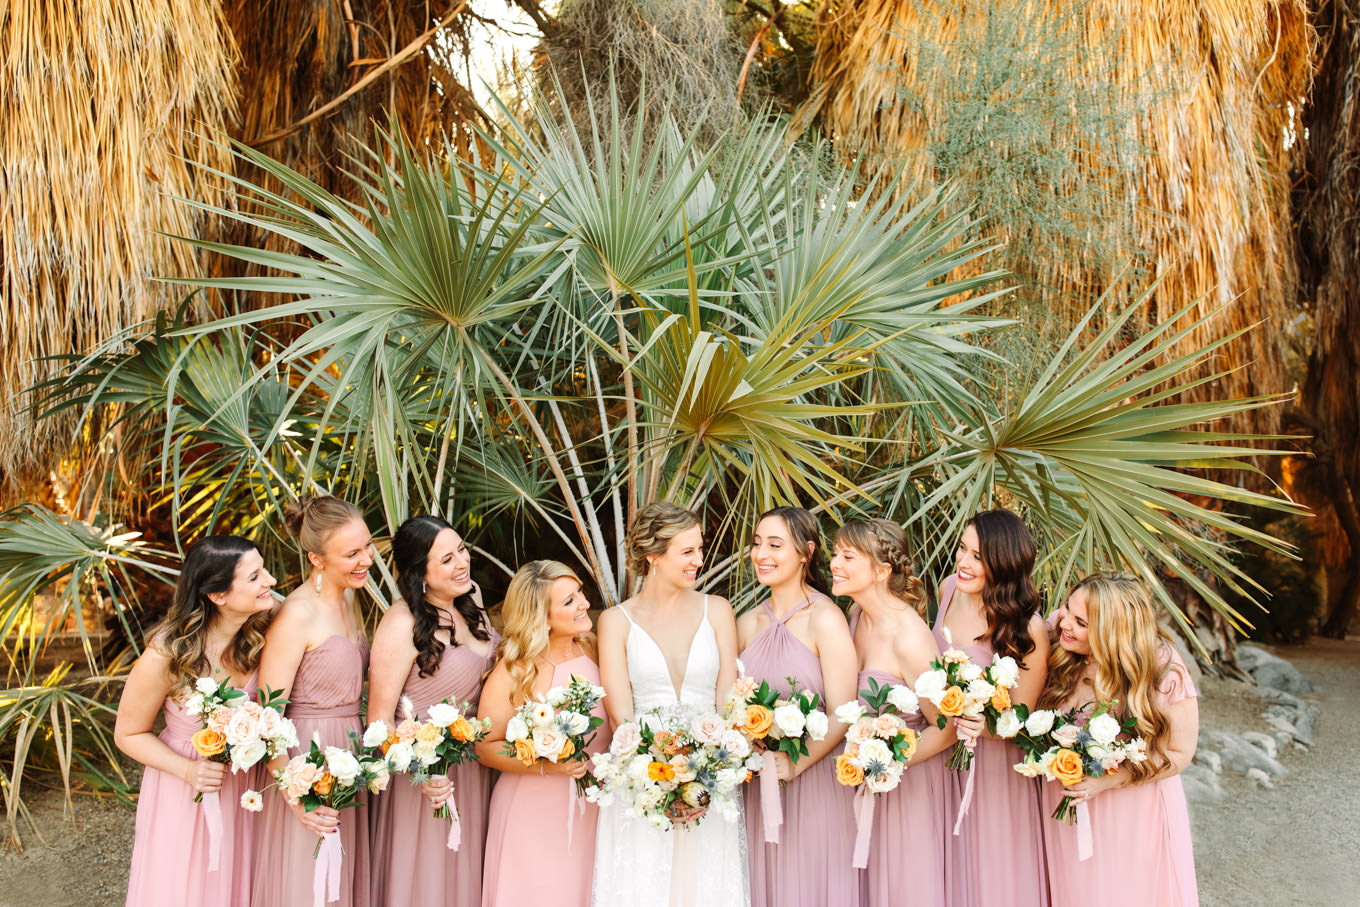 Bridal party in mauve at Living Desert Zoo | Engagement, elopement, and wedding photography roundup of Mary Costa’s favorite images from 2020 | Colorful and elevated photography for fun-loving couples in Southern California | #2020wedding #elopement #weddingphoto #weddingphotography   Source: Mary Costa Photography | Los Angeles